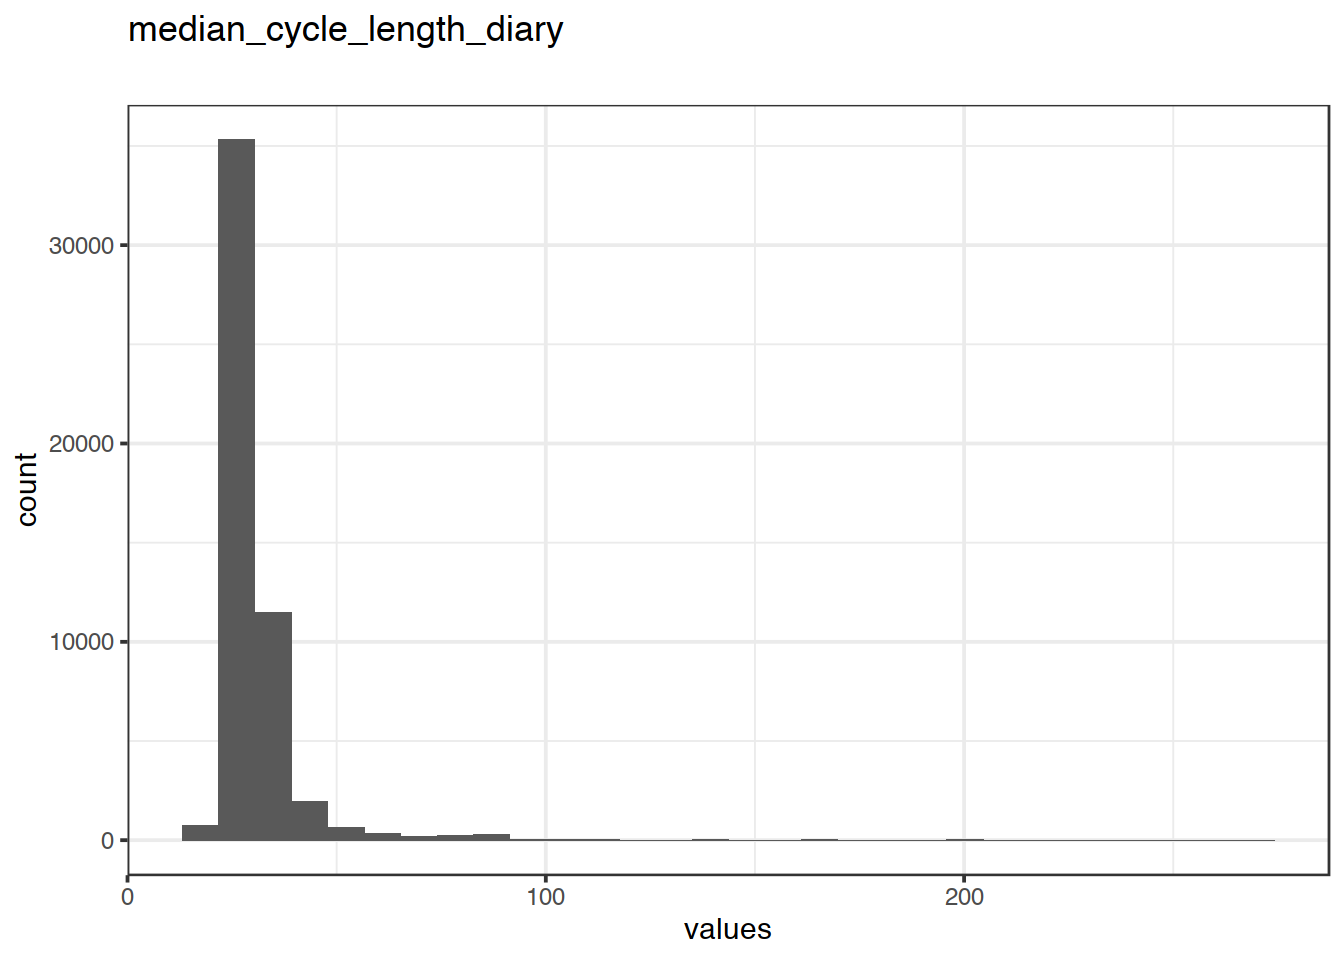 Distribution of values for median_cycle_length_diary